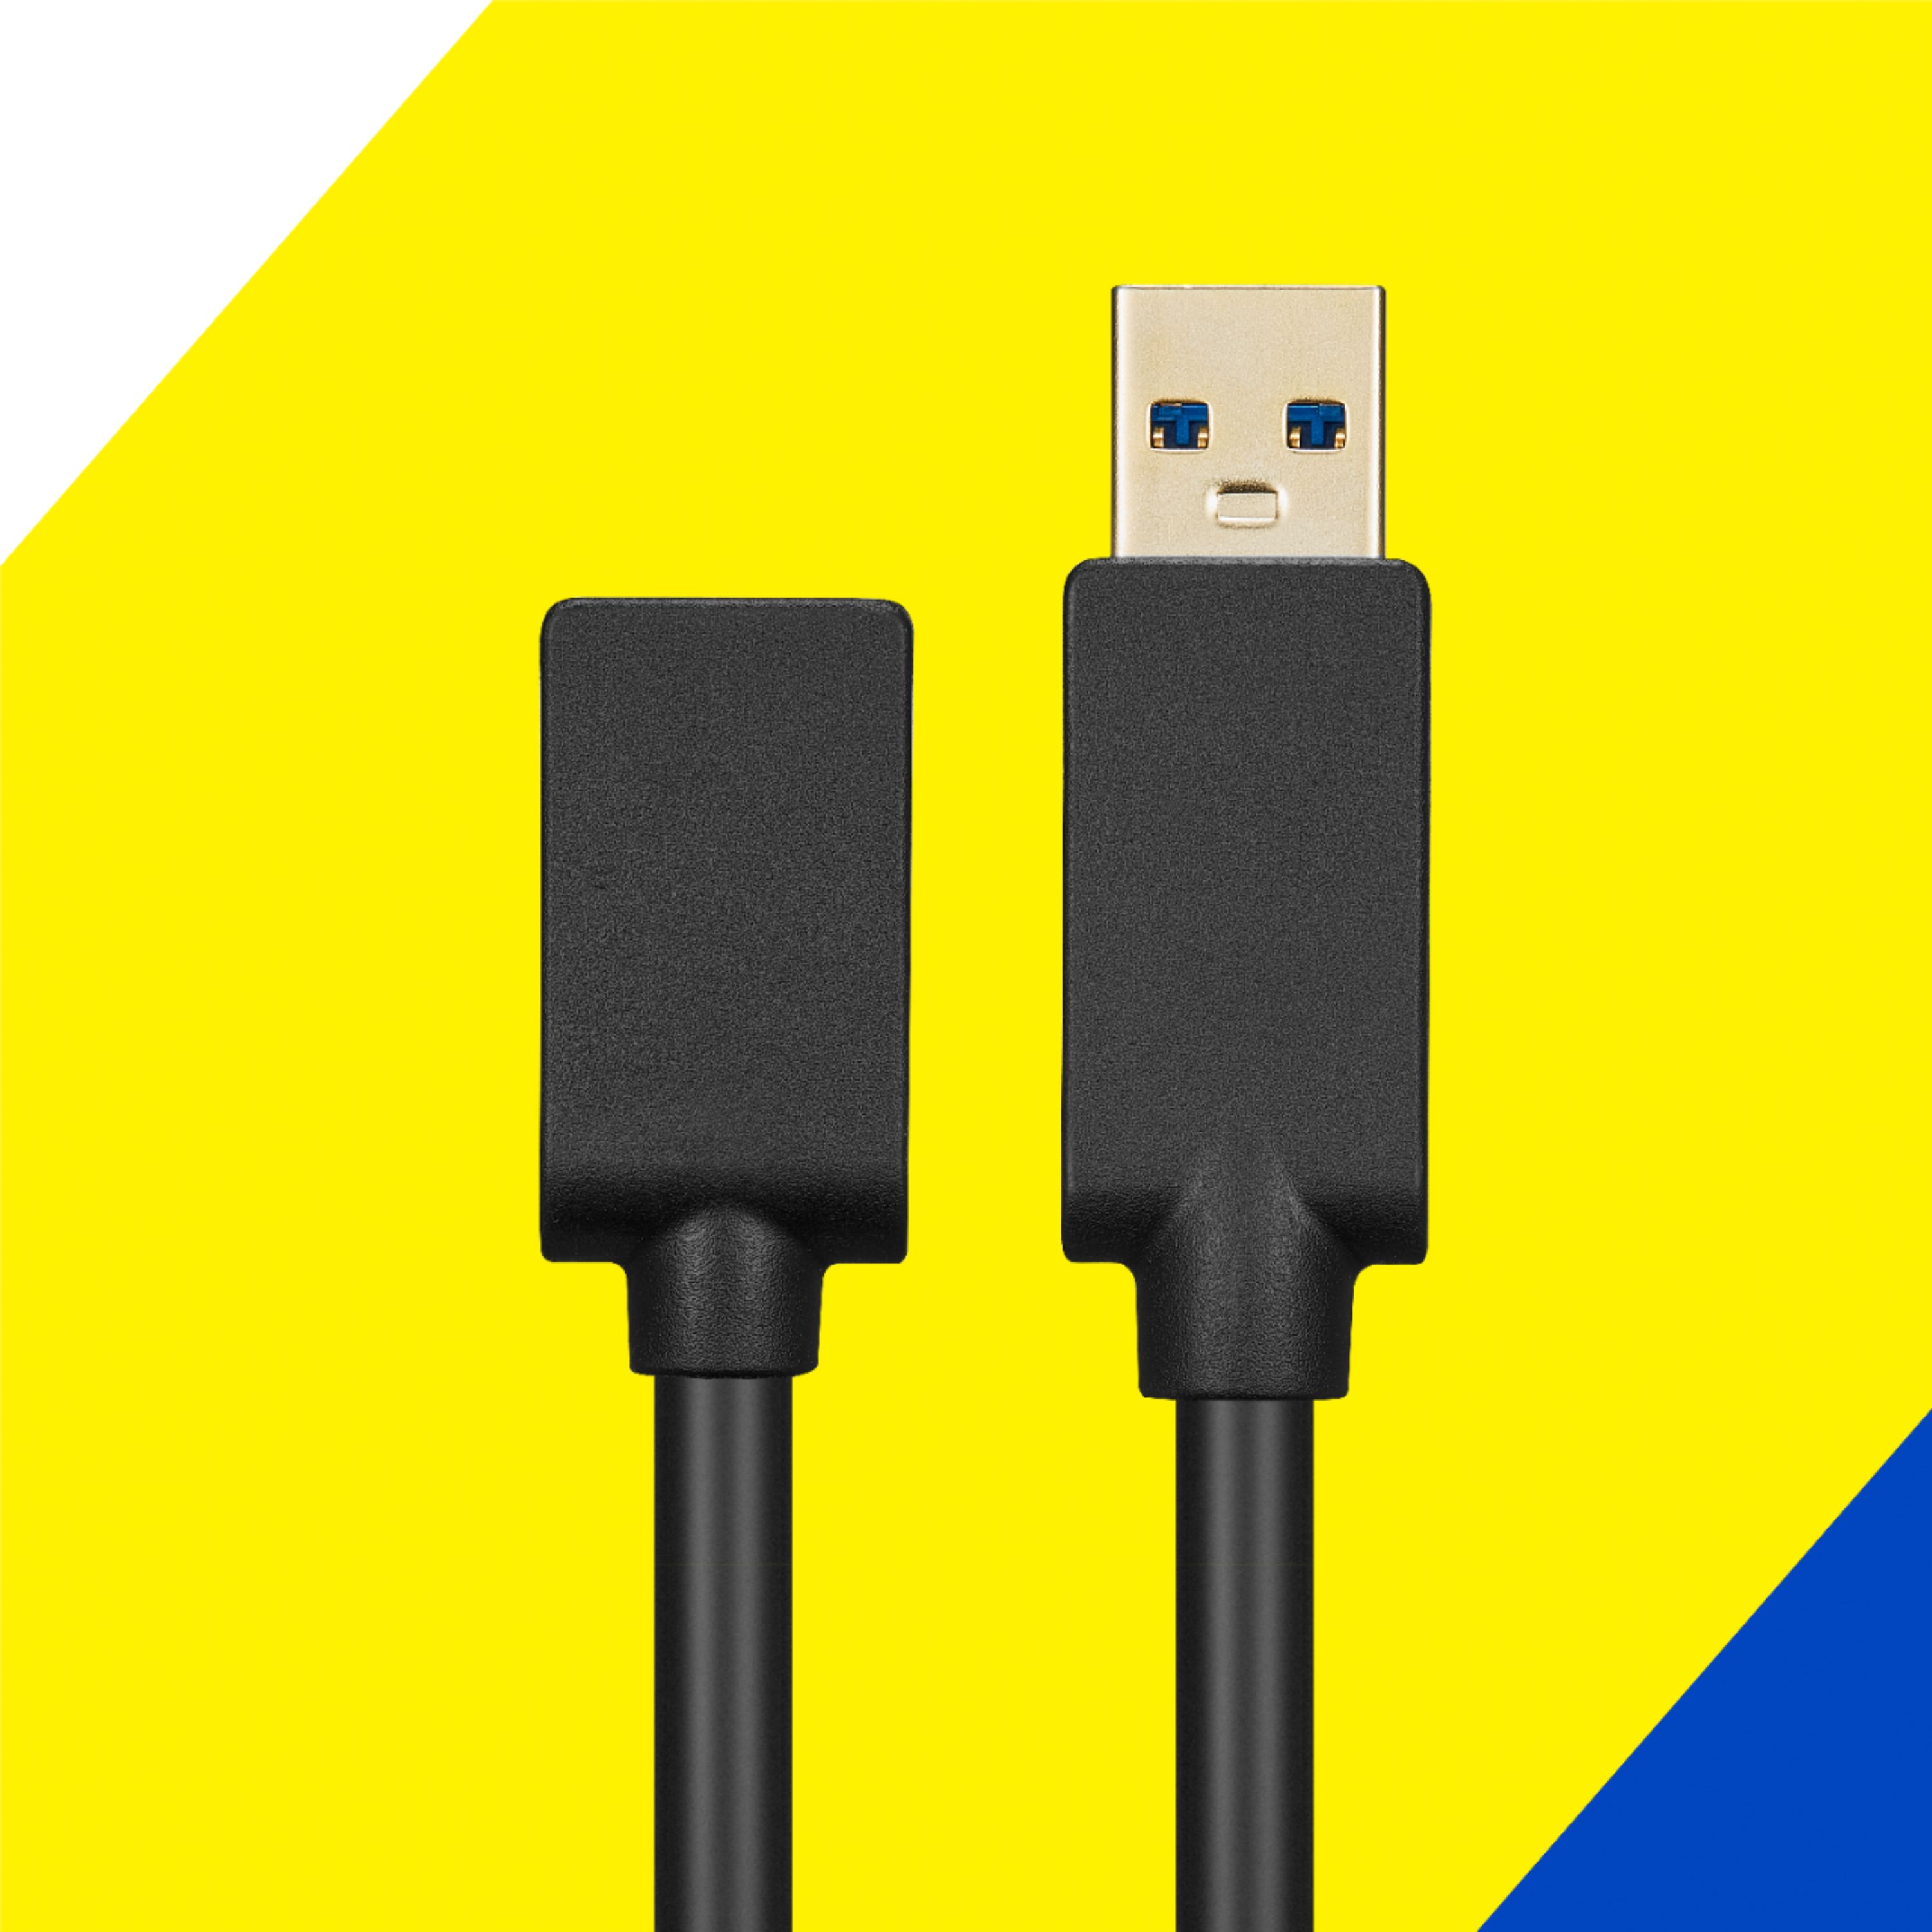 Comprehensive USB-C 3.0 Male to USB-A Male Cable (10')